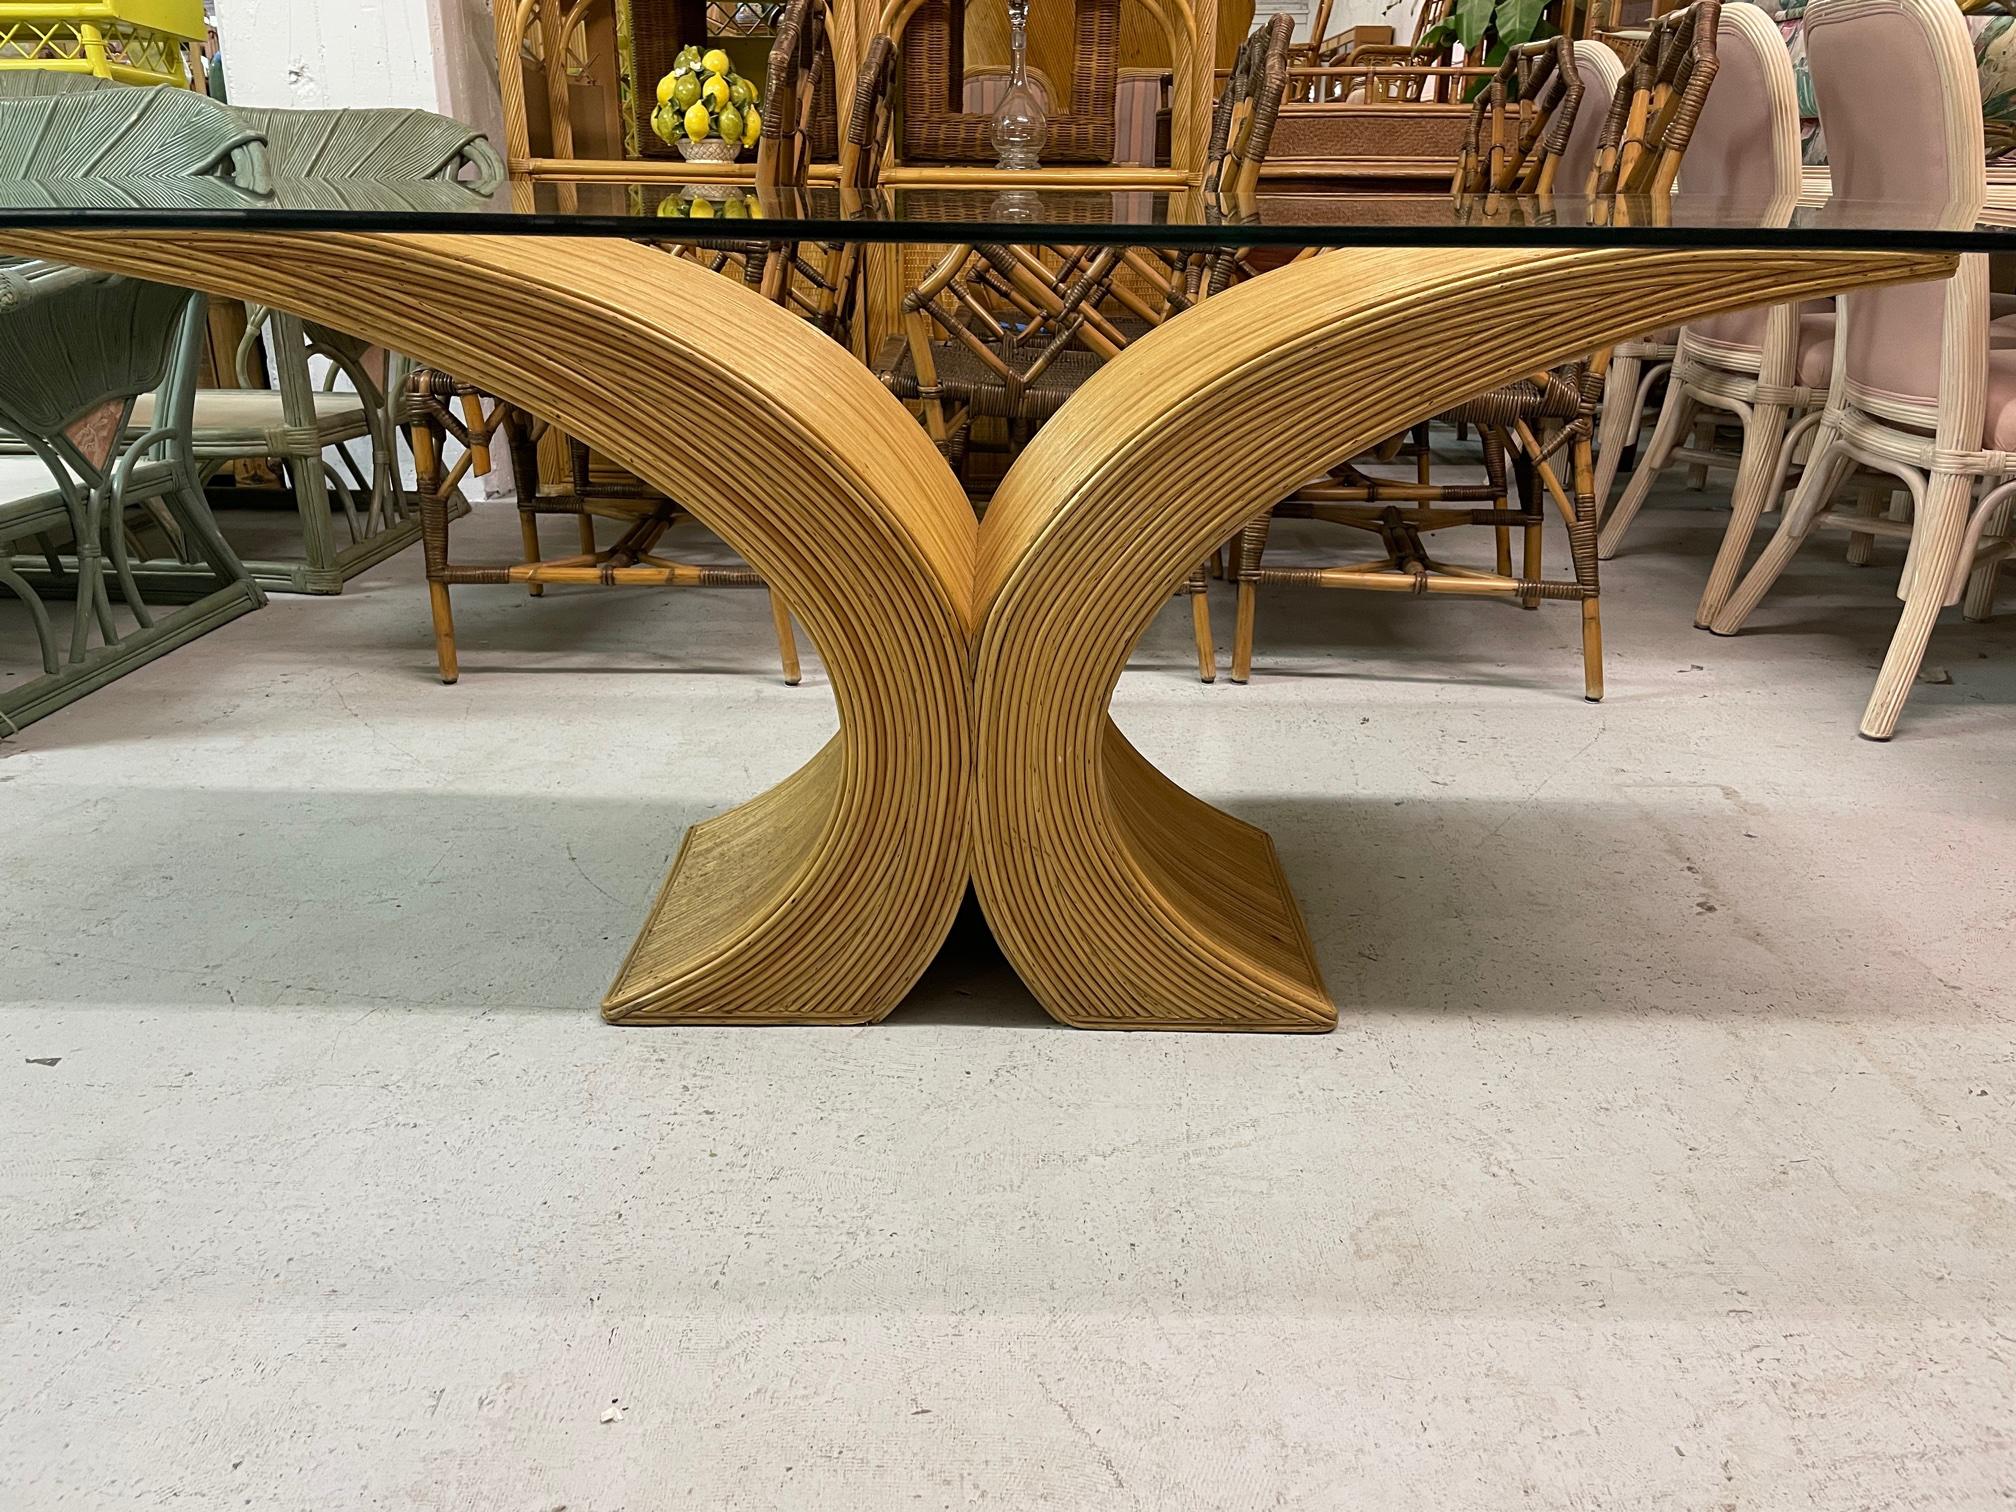 Large sculptural dining table base features full veneer of pencil reed rattan. No glass included. Good condition with minor imperfections consistent with age. May exhibit scuffs, marks, or wear, see photos for details. Base measures 60